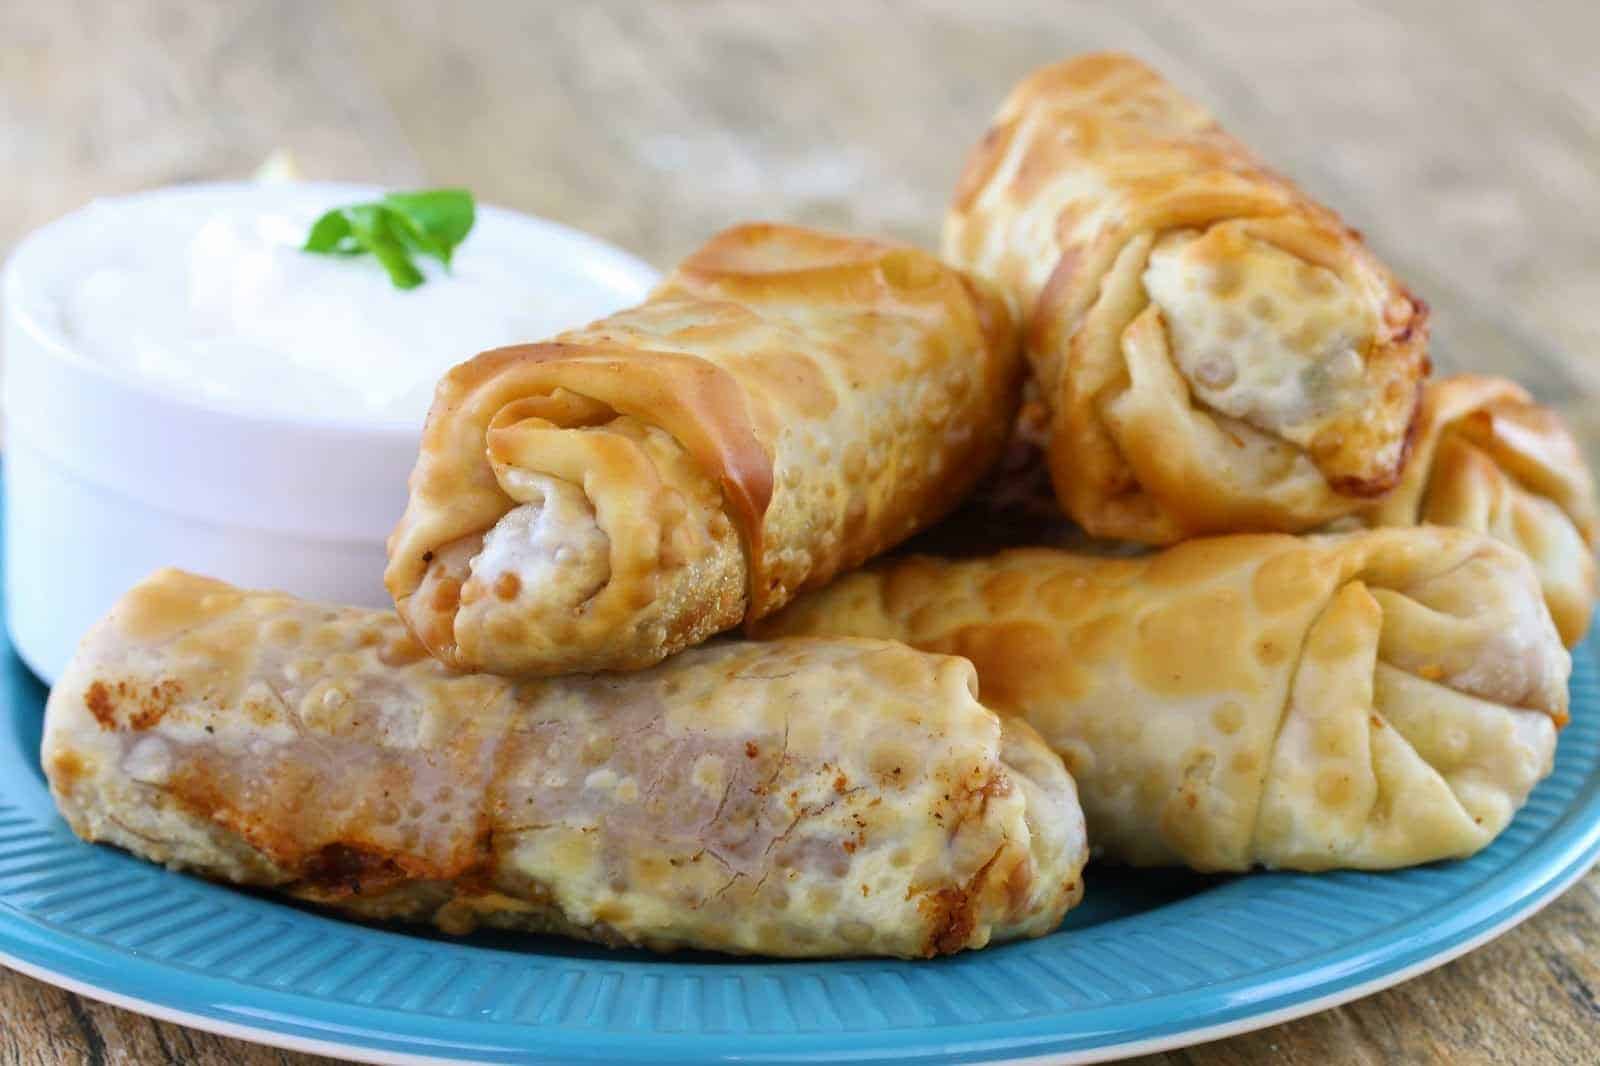 Mexican Eggrolls on a blue plate.